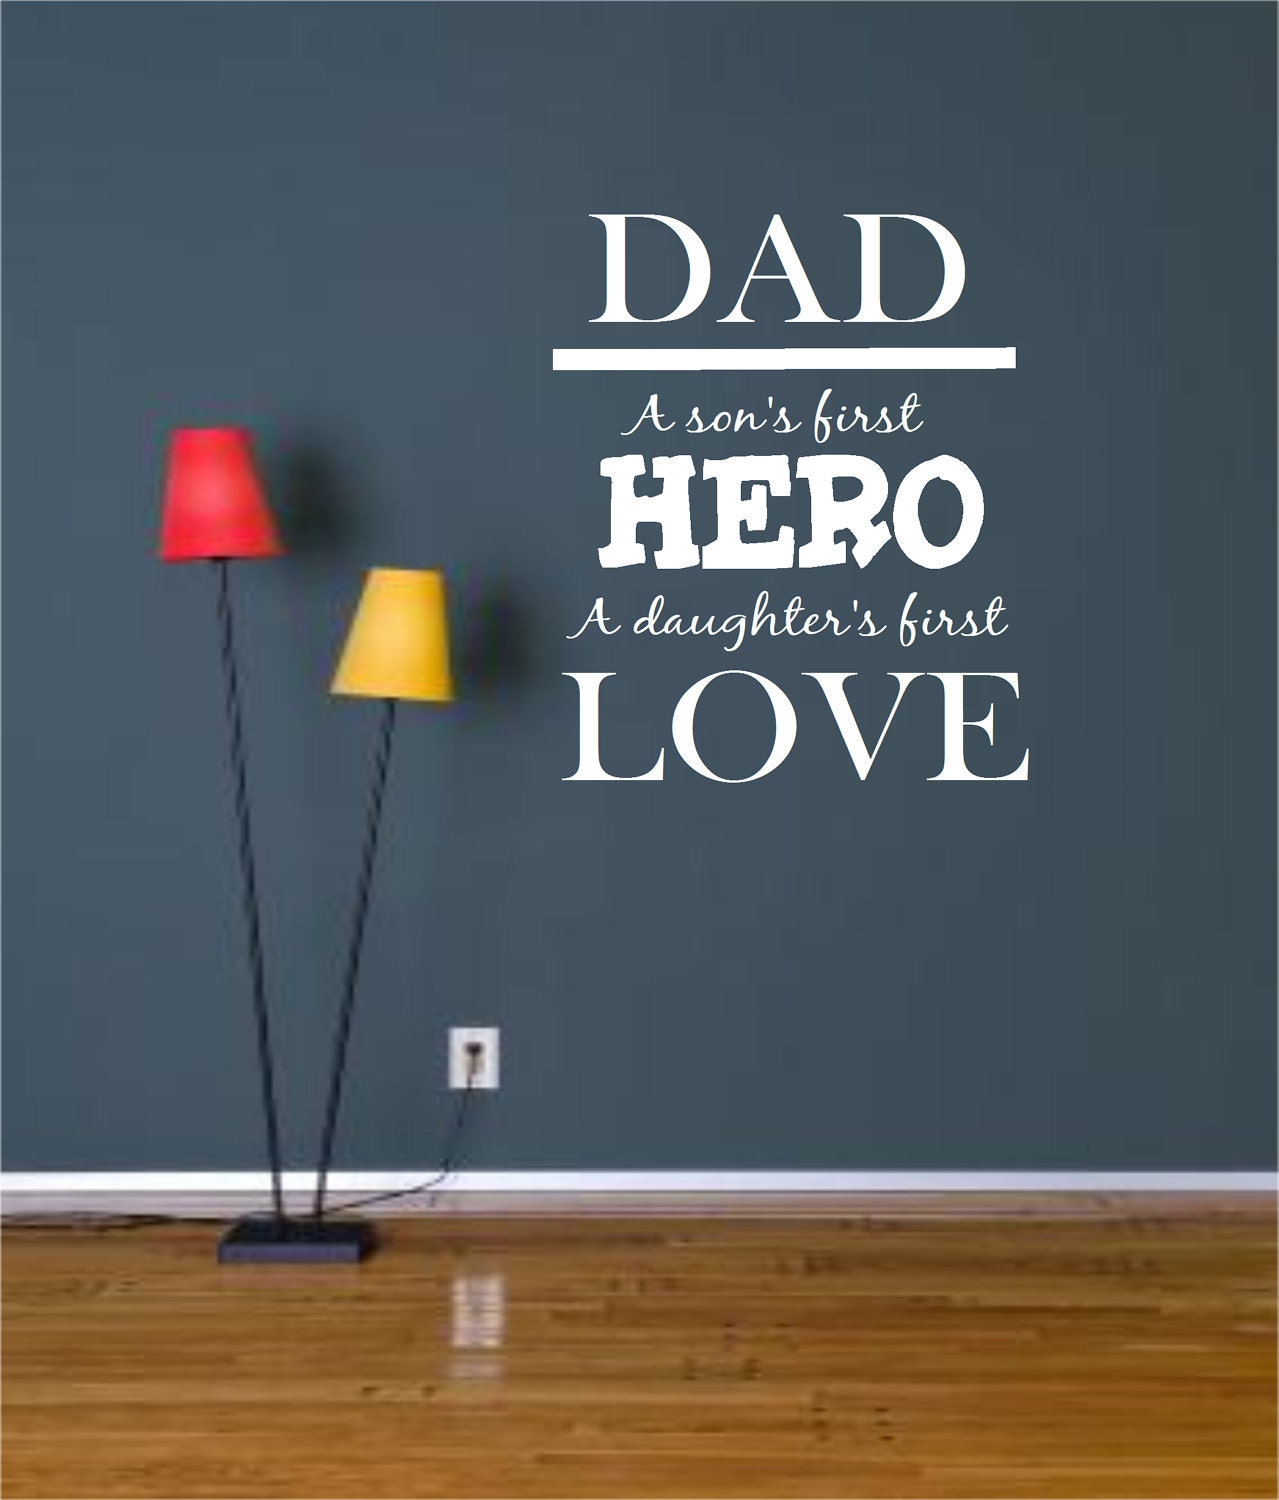 Dad a sons first Hero a daughters first LOVE Wall Decal